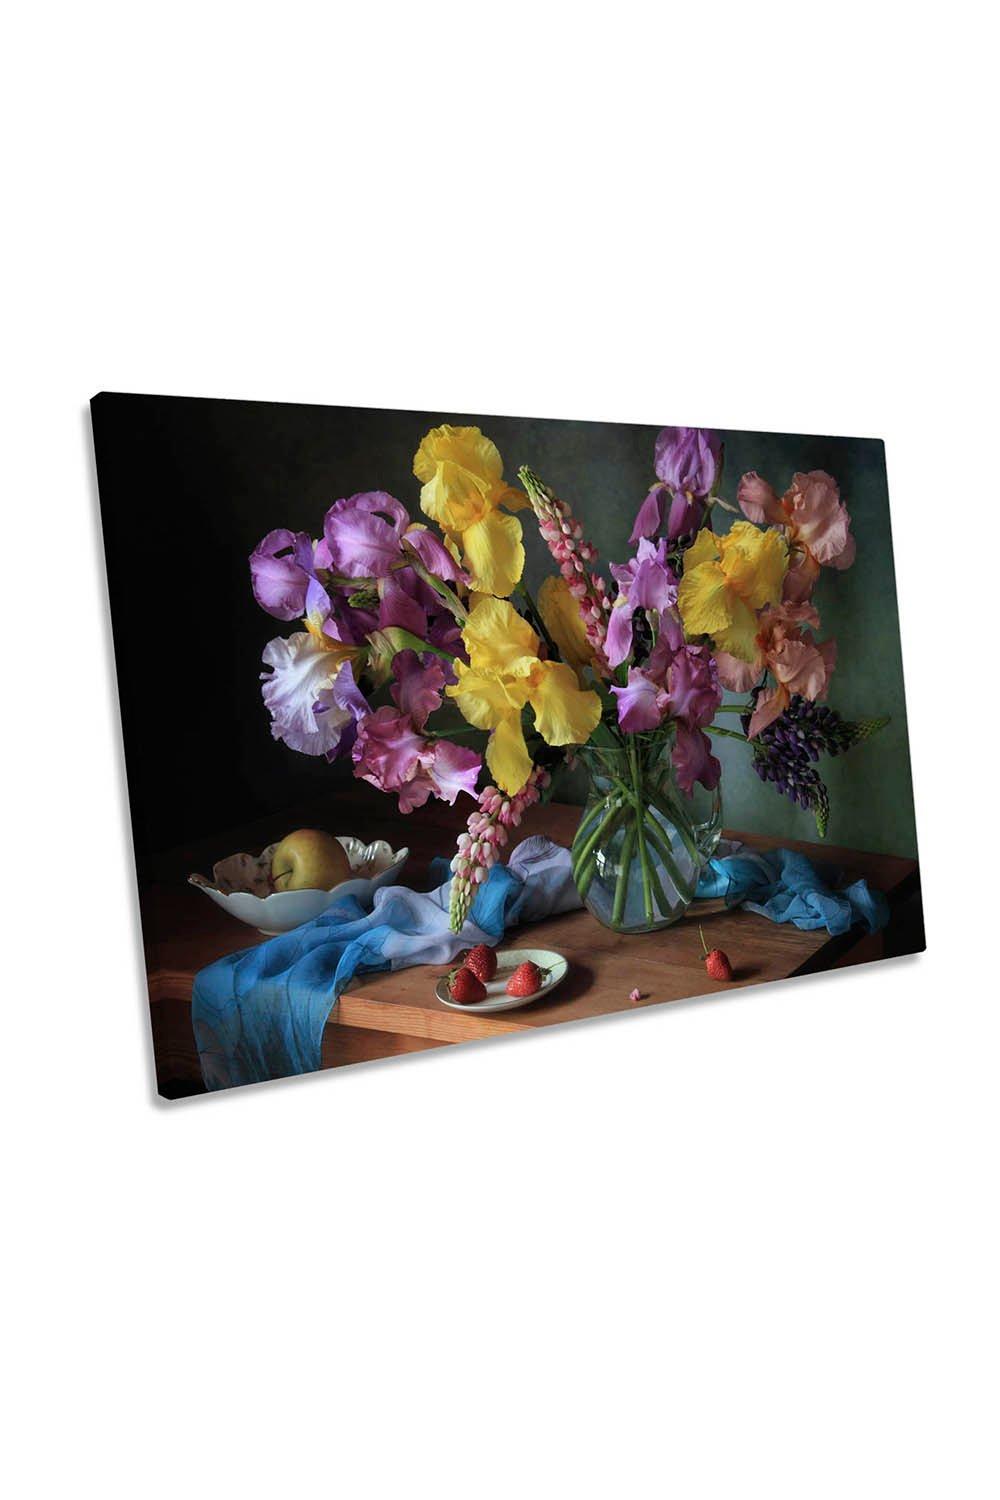 Bouquet Flowers Irises Lupine Floral Canvas Wall Art Picture Print